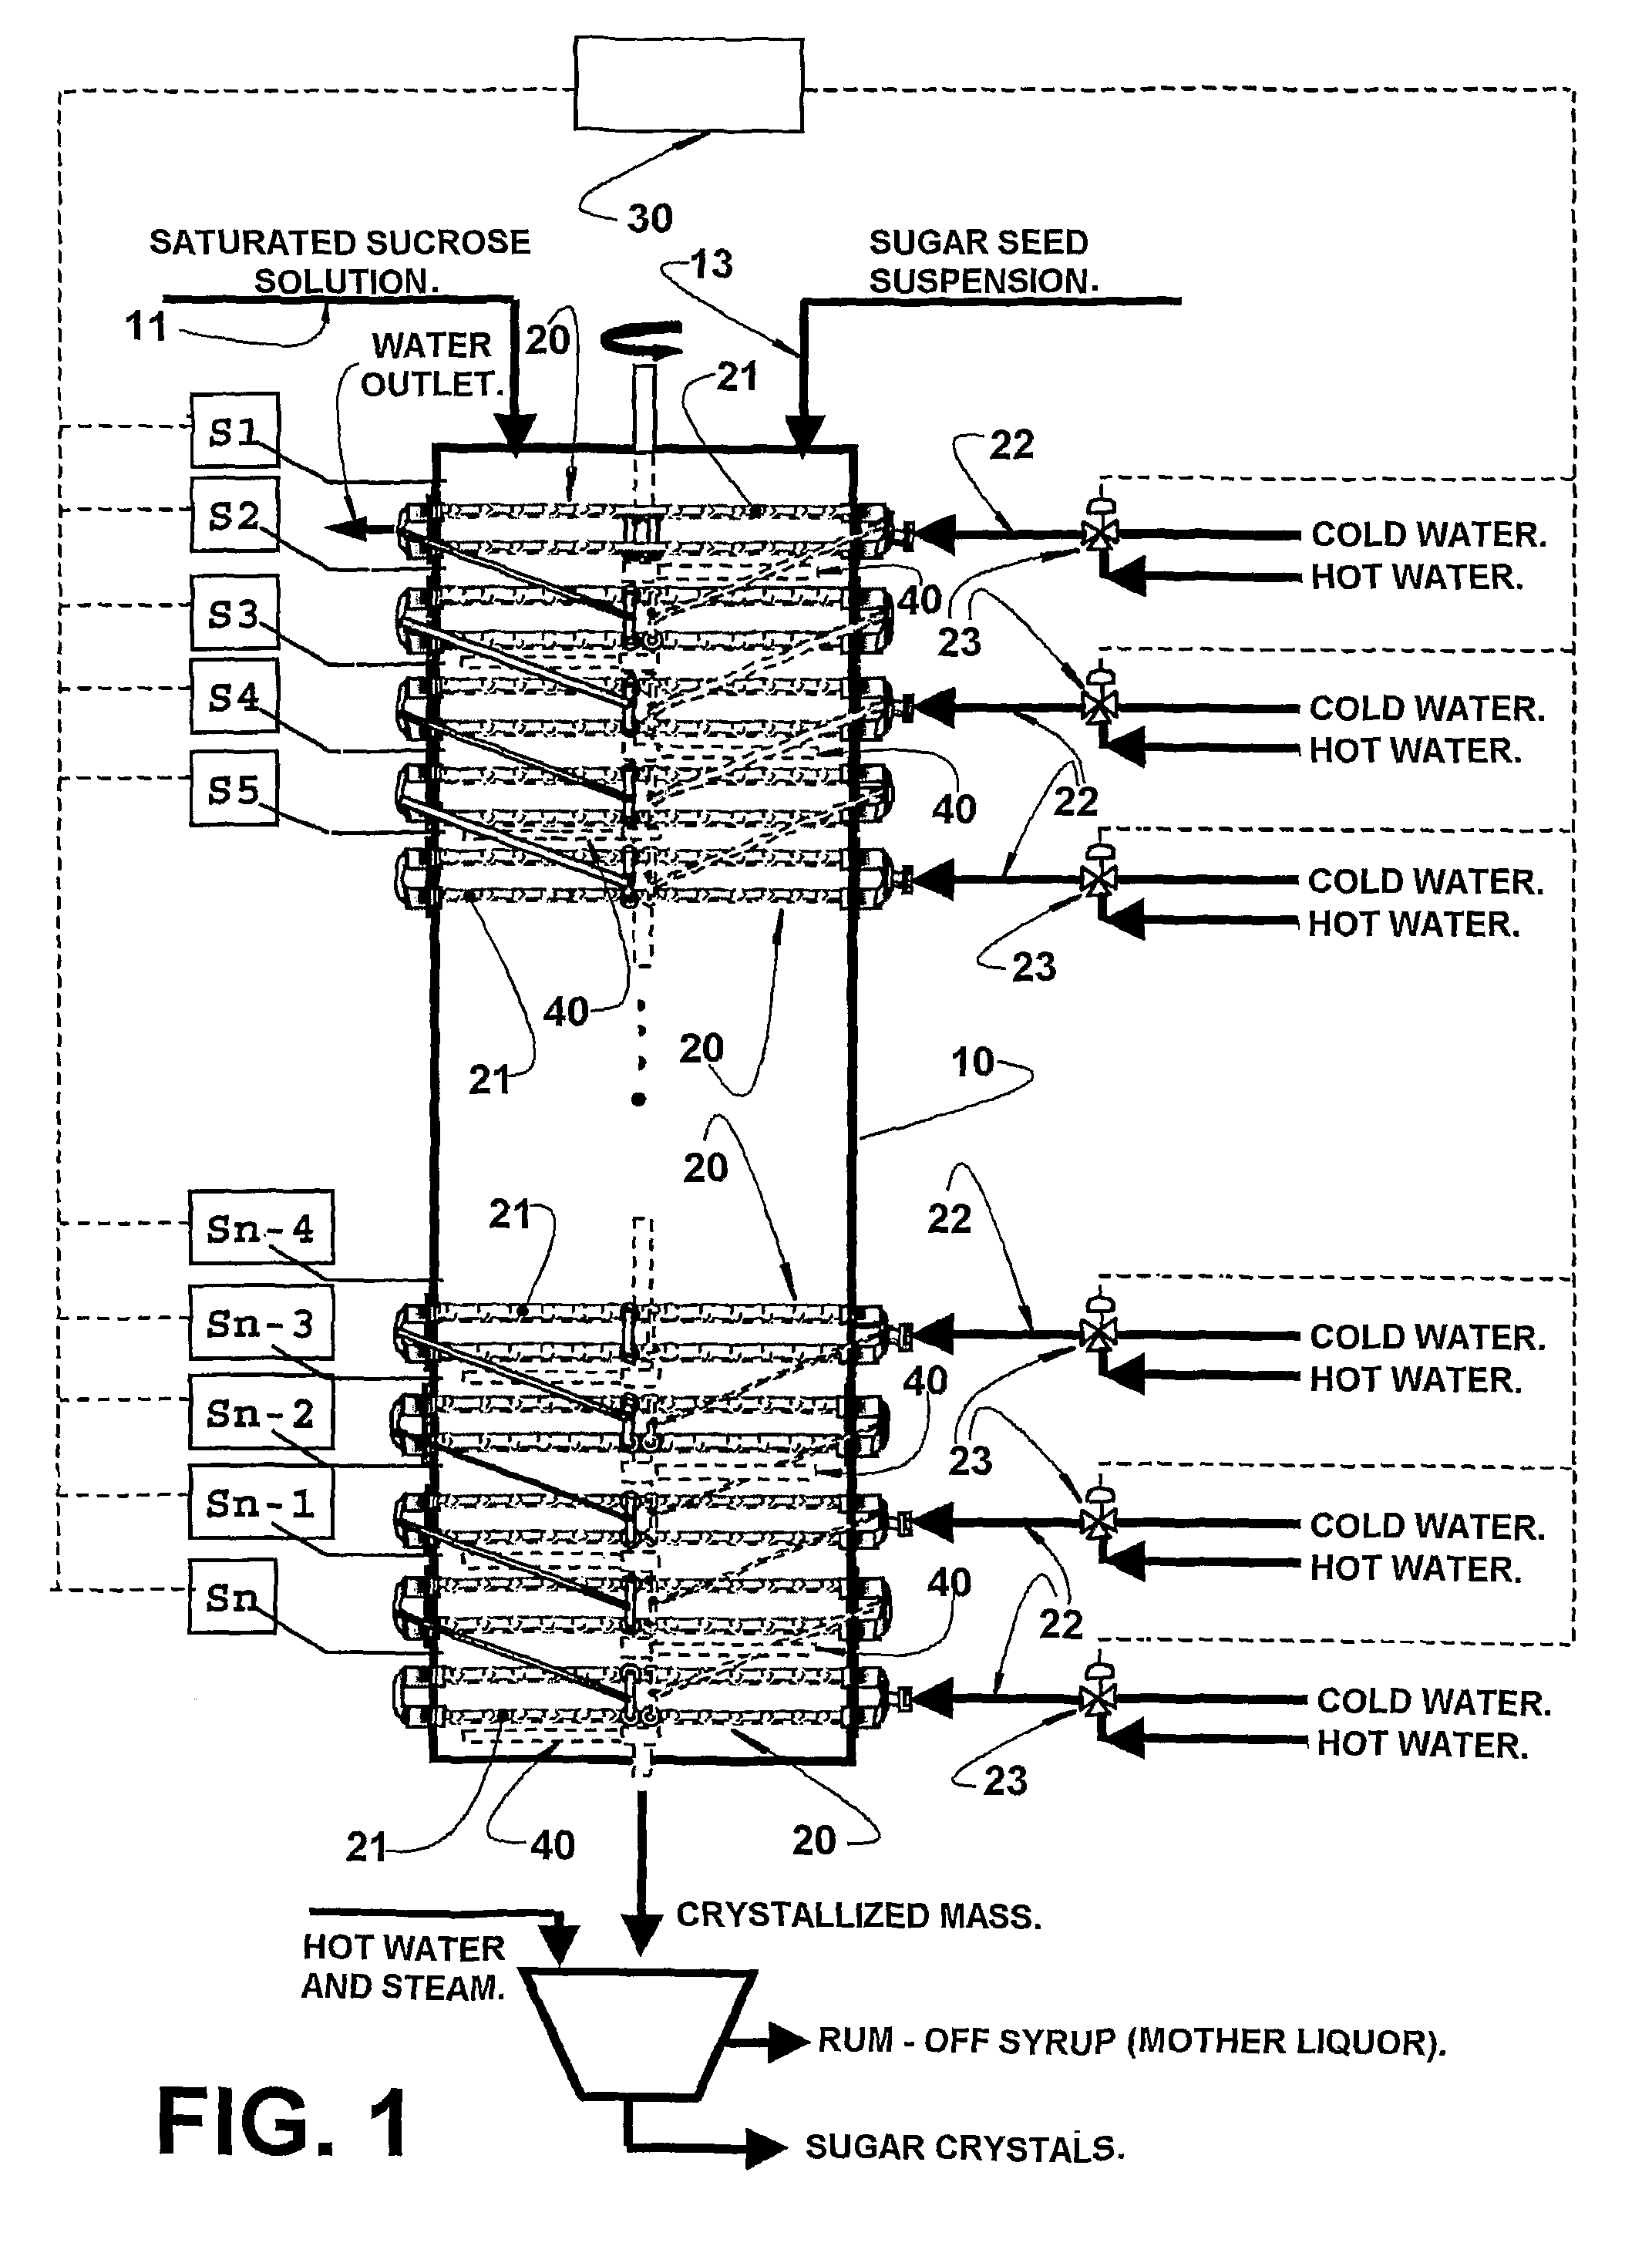 Process and equipment for sugar crystallization by controlled cooling